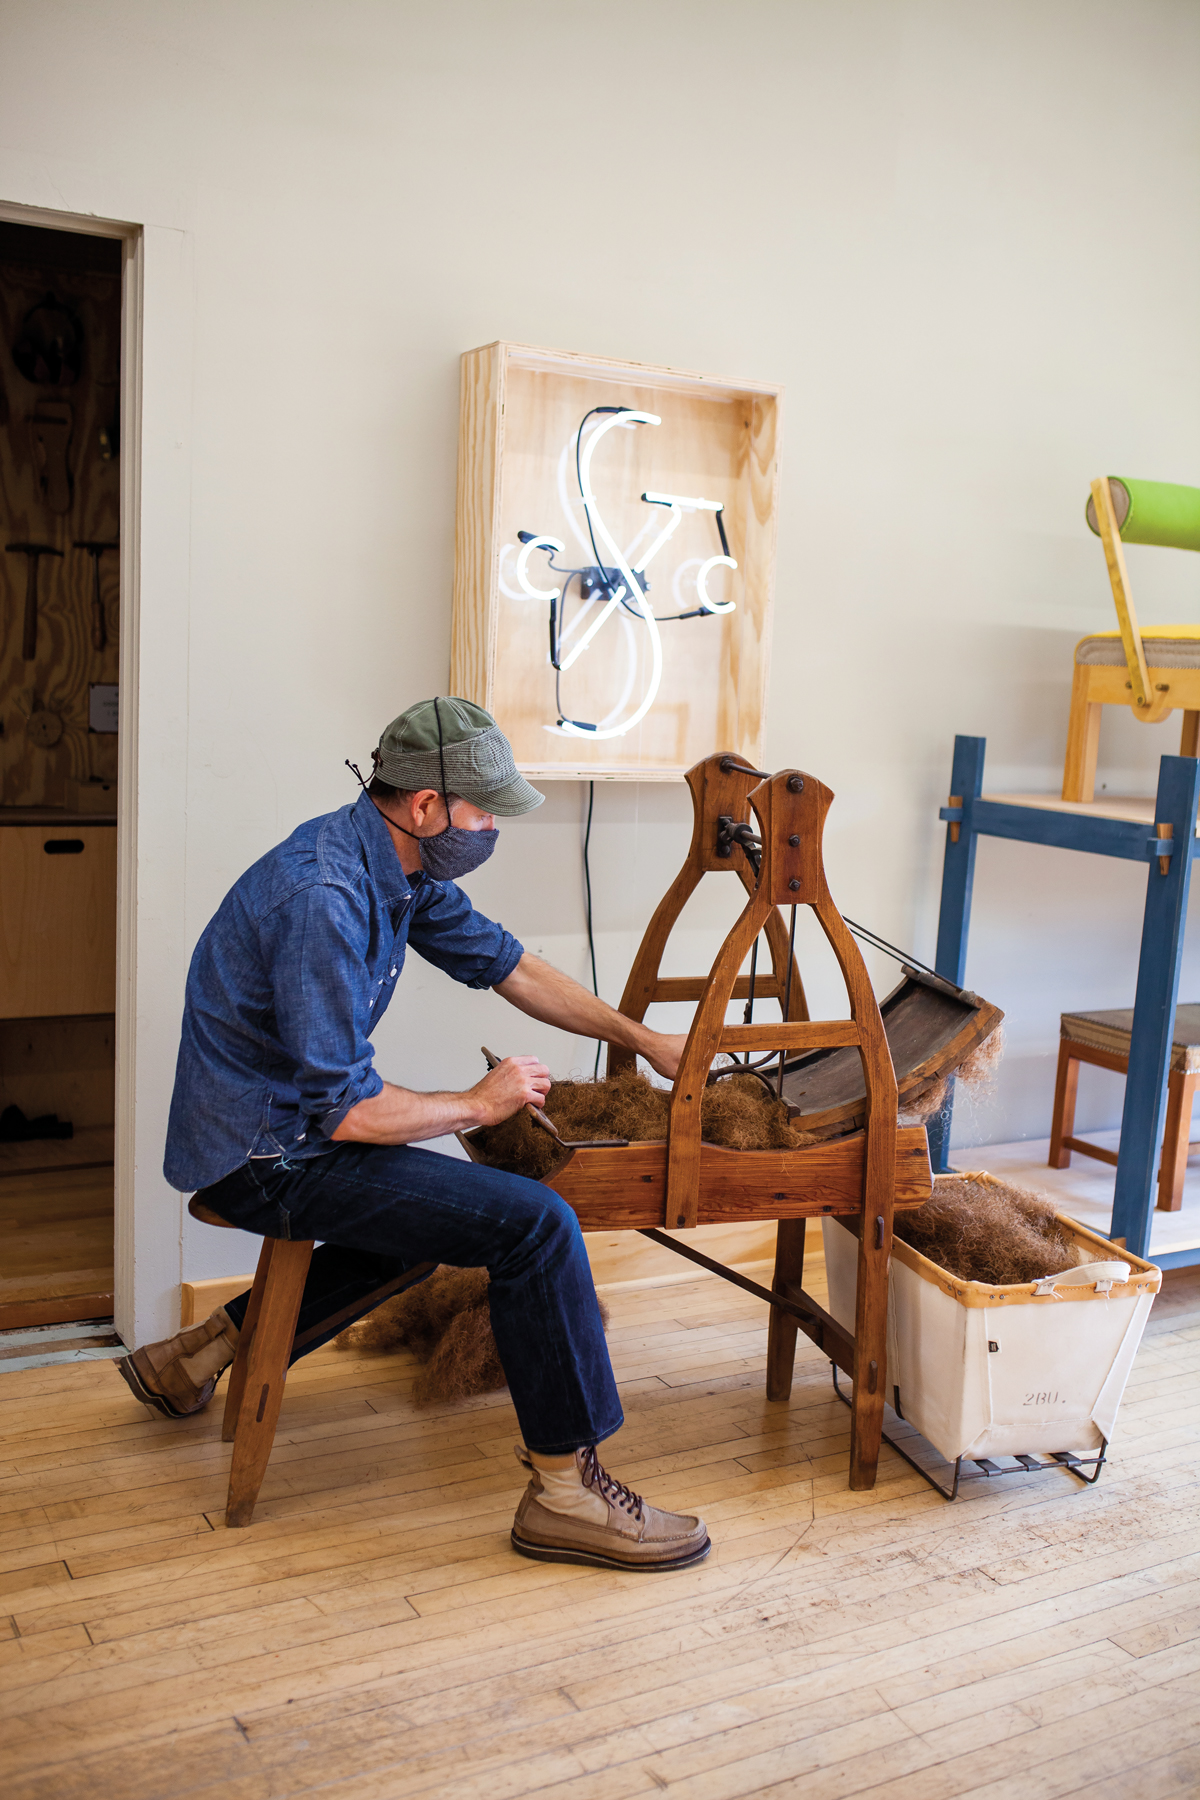 traditional furniture artist using an antique device to create coarse natural fiber for stuffing furniture